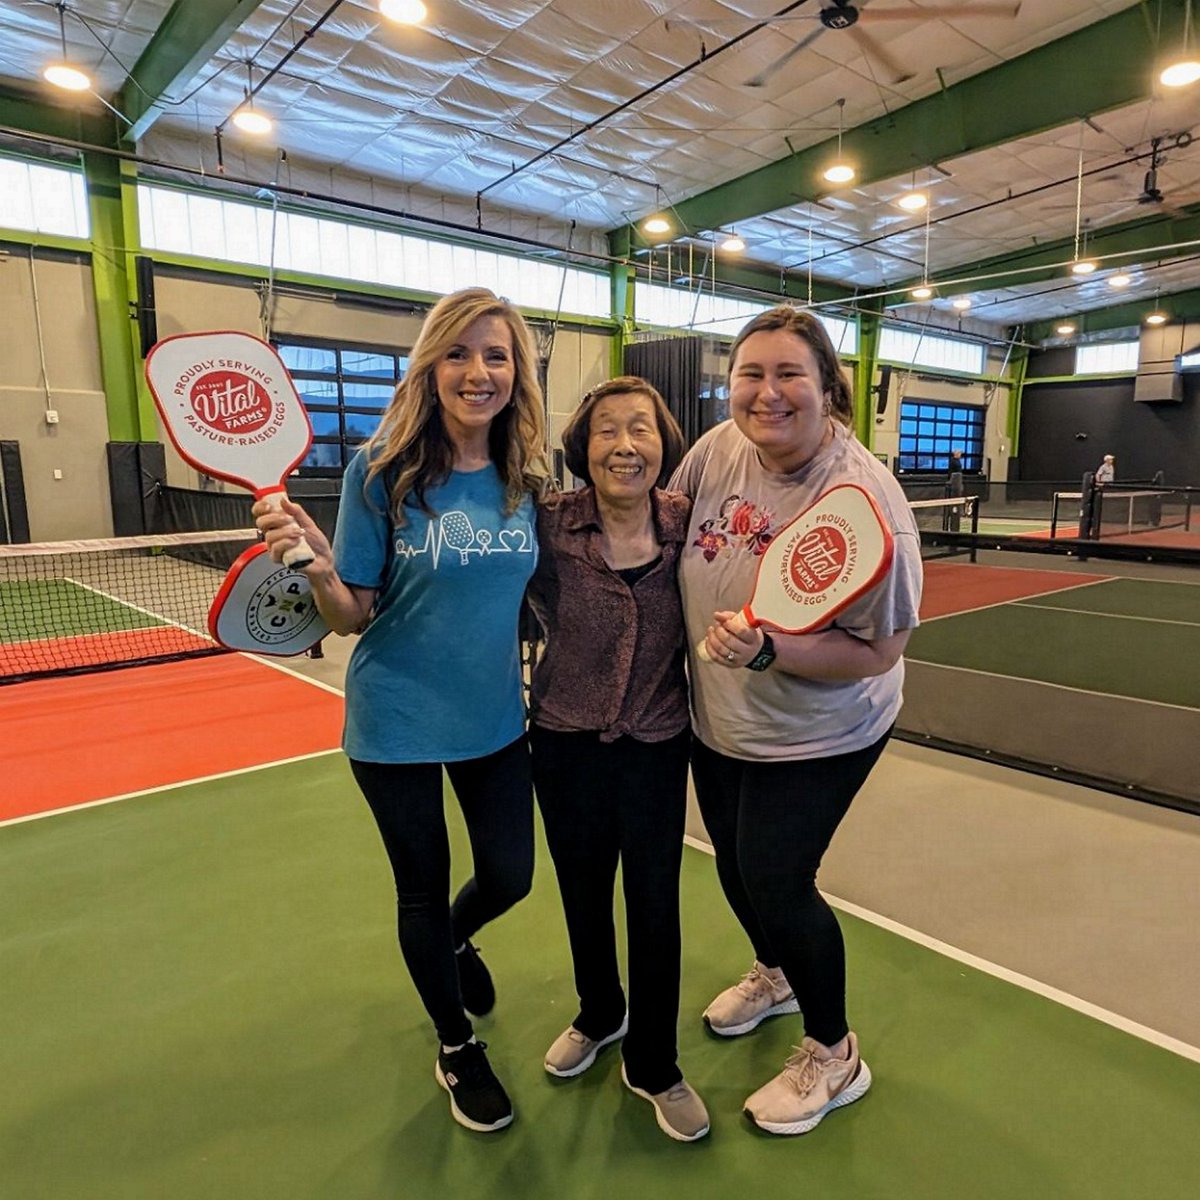 Juliet’s dream of playing pickleball came true this week when the Remington at Valley Ranch’s team took her to play. Thanks to Tree of Dreams for getting her back on the court! #PickleballForSeniors #SonidaSeniorLiving #SonidaJoyfulNotes #FindYourJoyHere